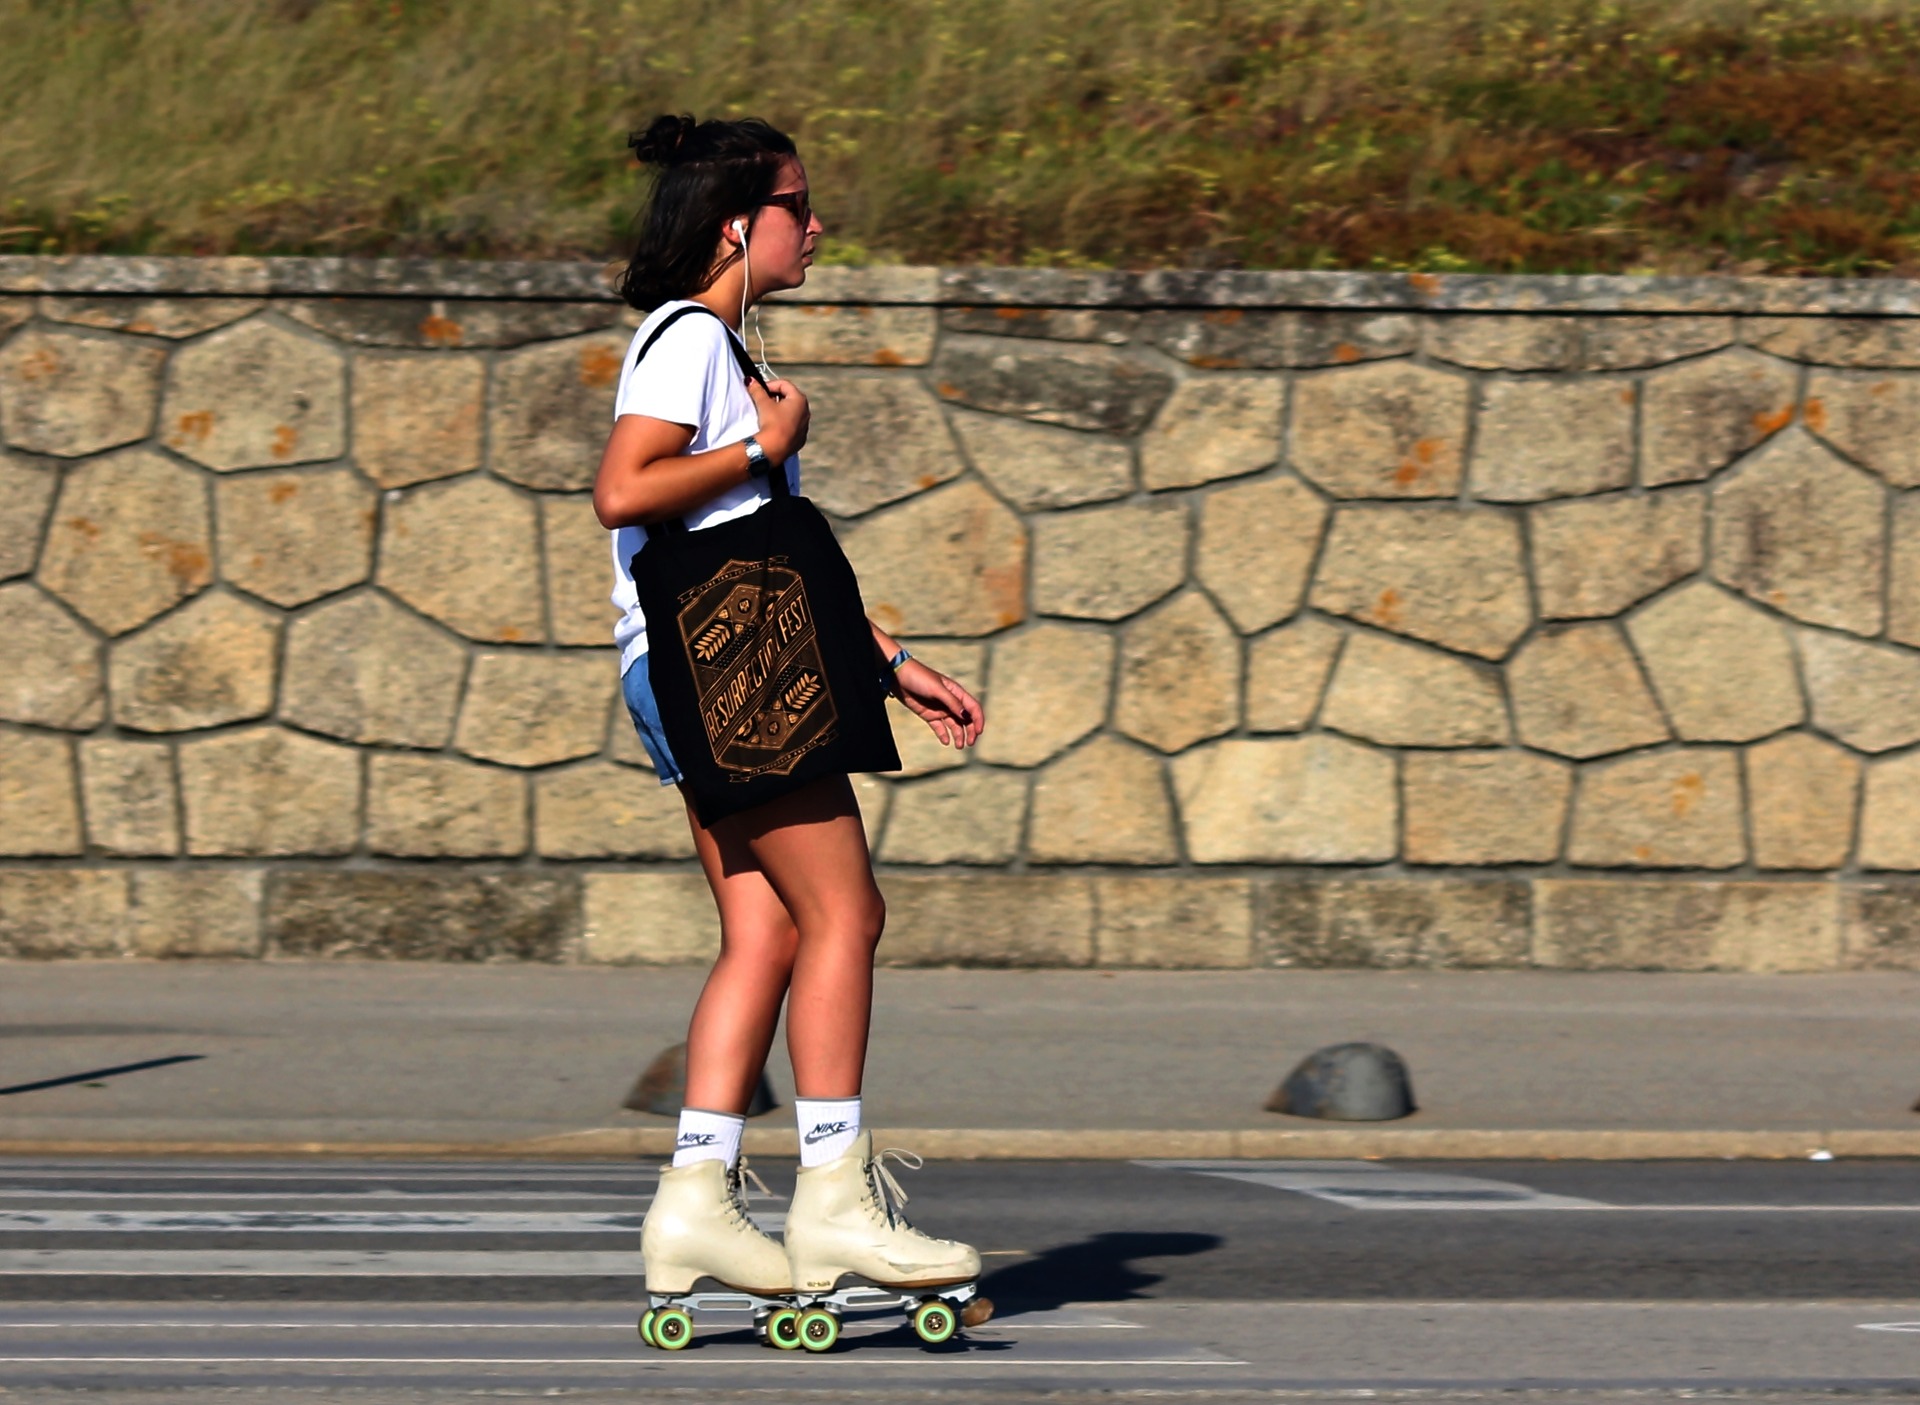 Best Ways To Stay Safe During Your Rollerblading Adventures